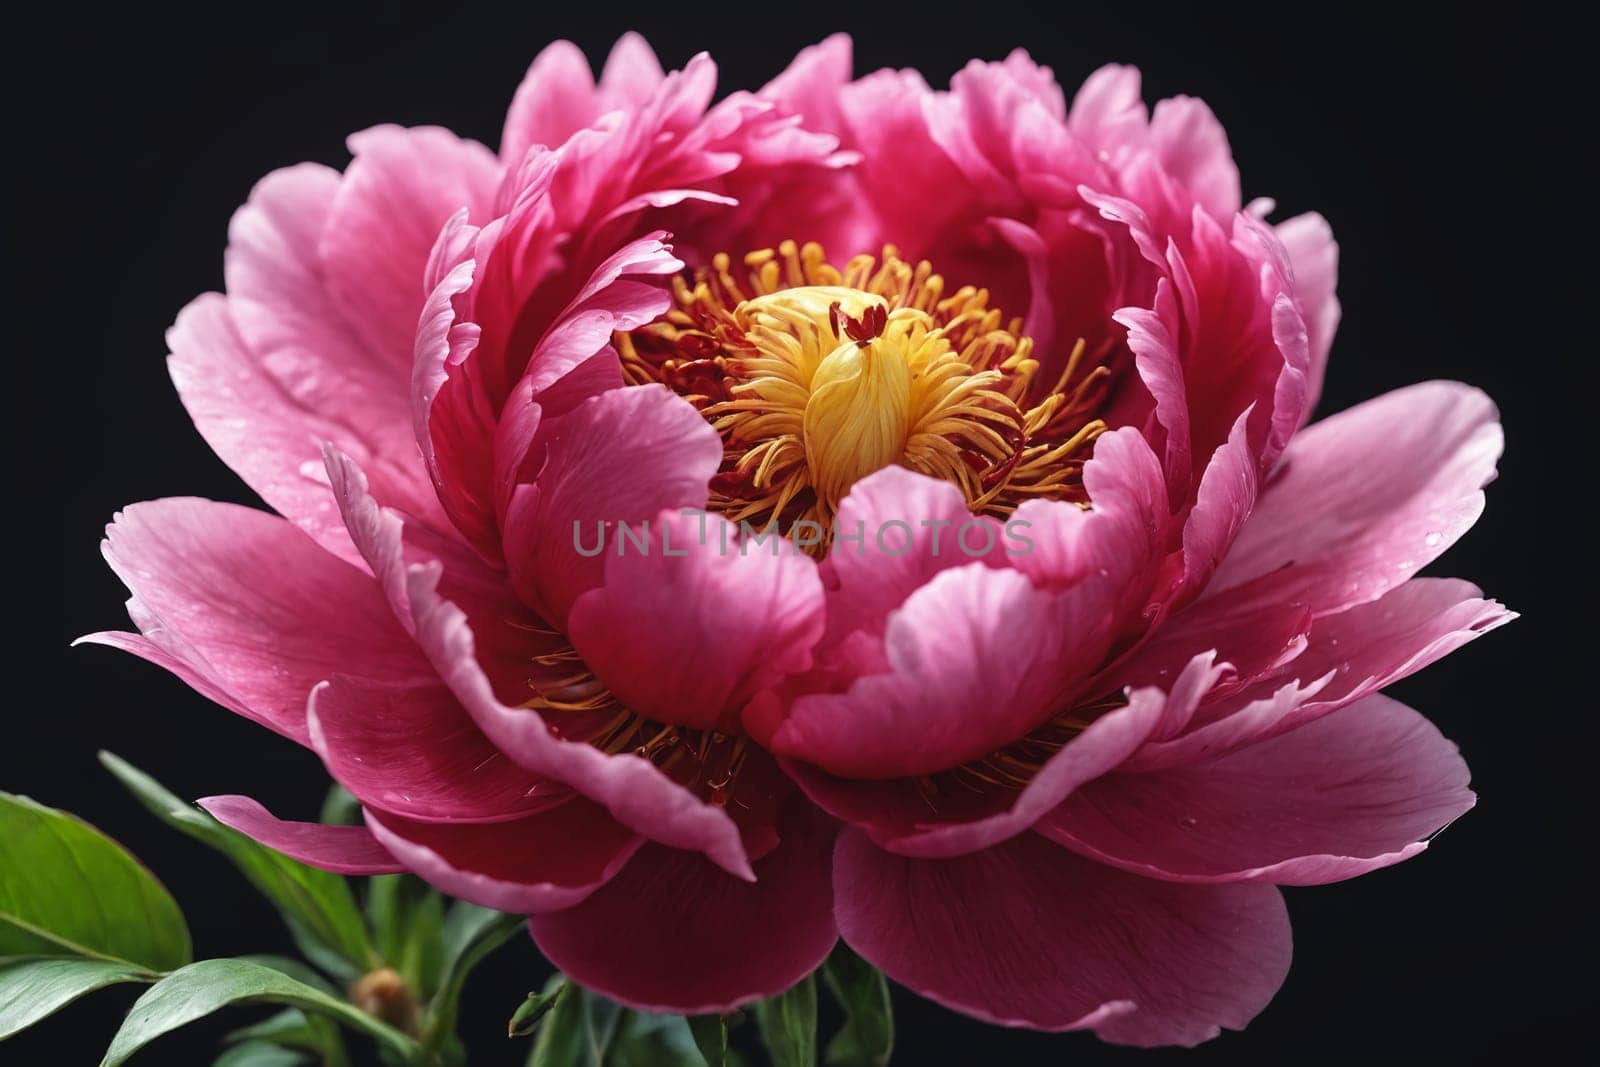 An exquisite image that captures the heart of a pink peony in a full bloom stage. A true embodiment of nature's grace, perfect for botanical blogs or to promote wellness and beauty products.